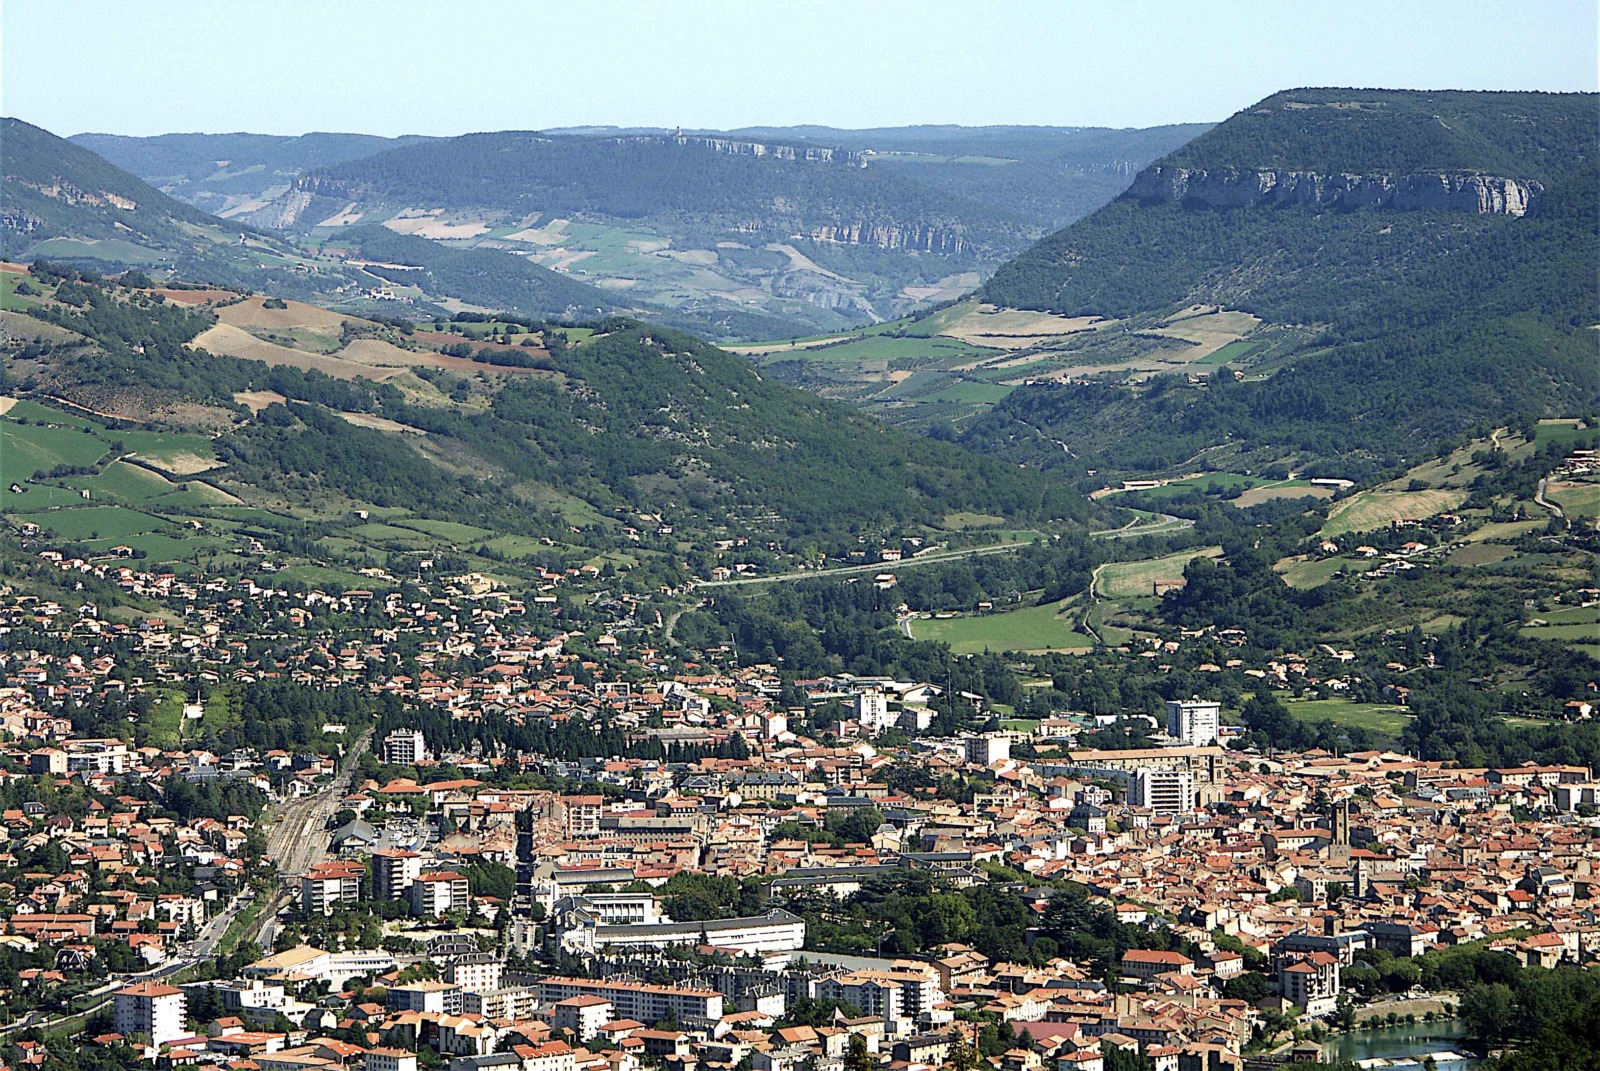 Millau © Castanet - licence [CC BY-SA 3.0] from Wikimedia Commons